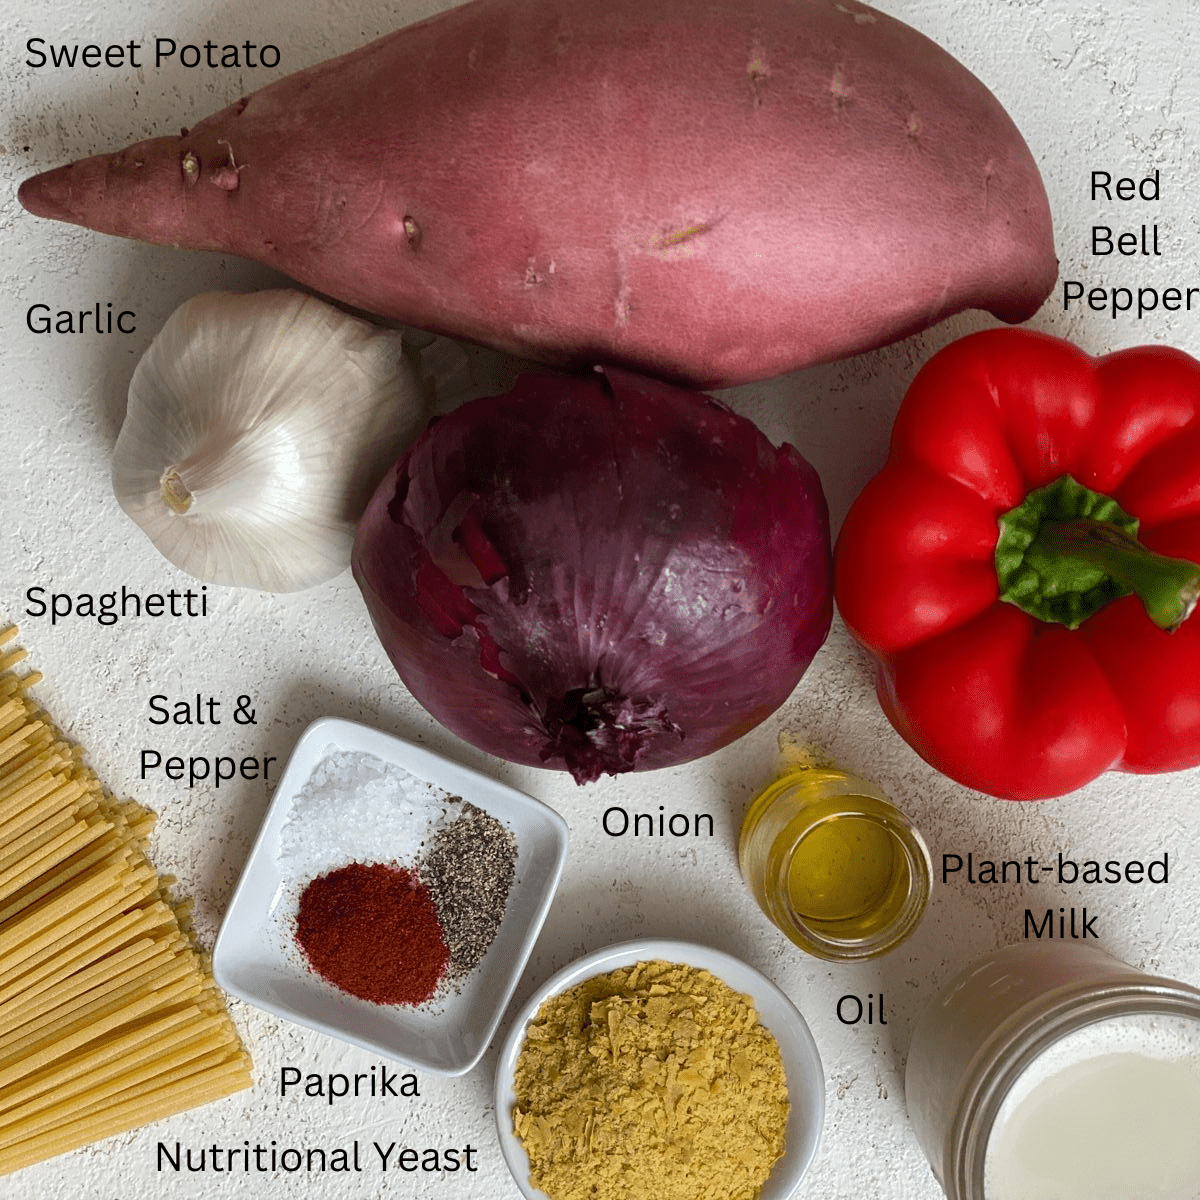 ingredients for Sweet Potato Pasta Sauce with Spaghetti measured out against a white surface